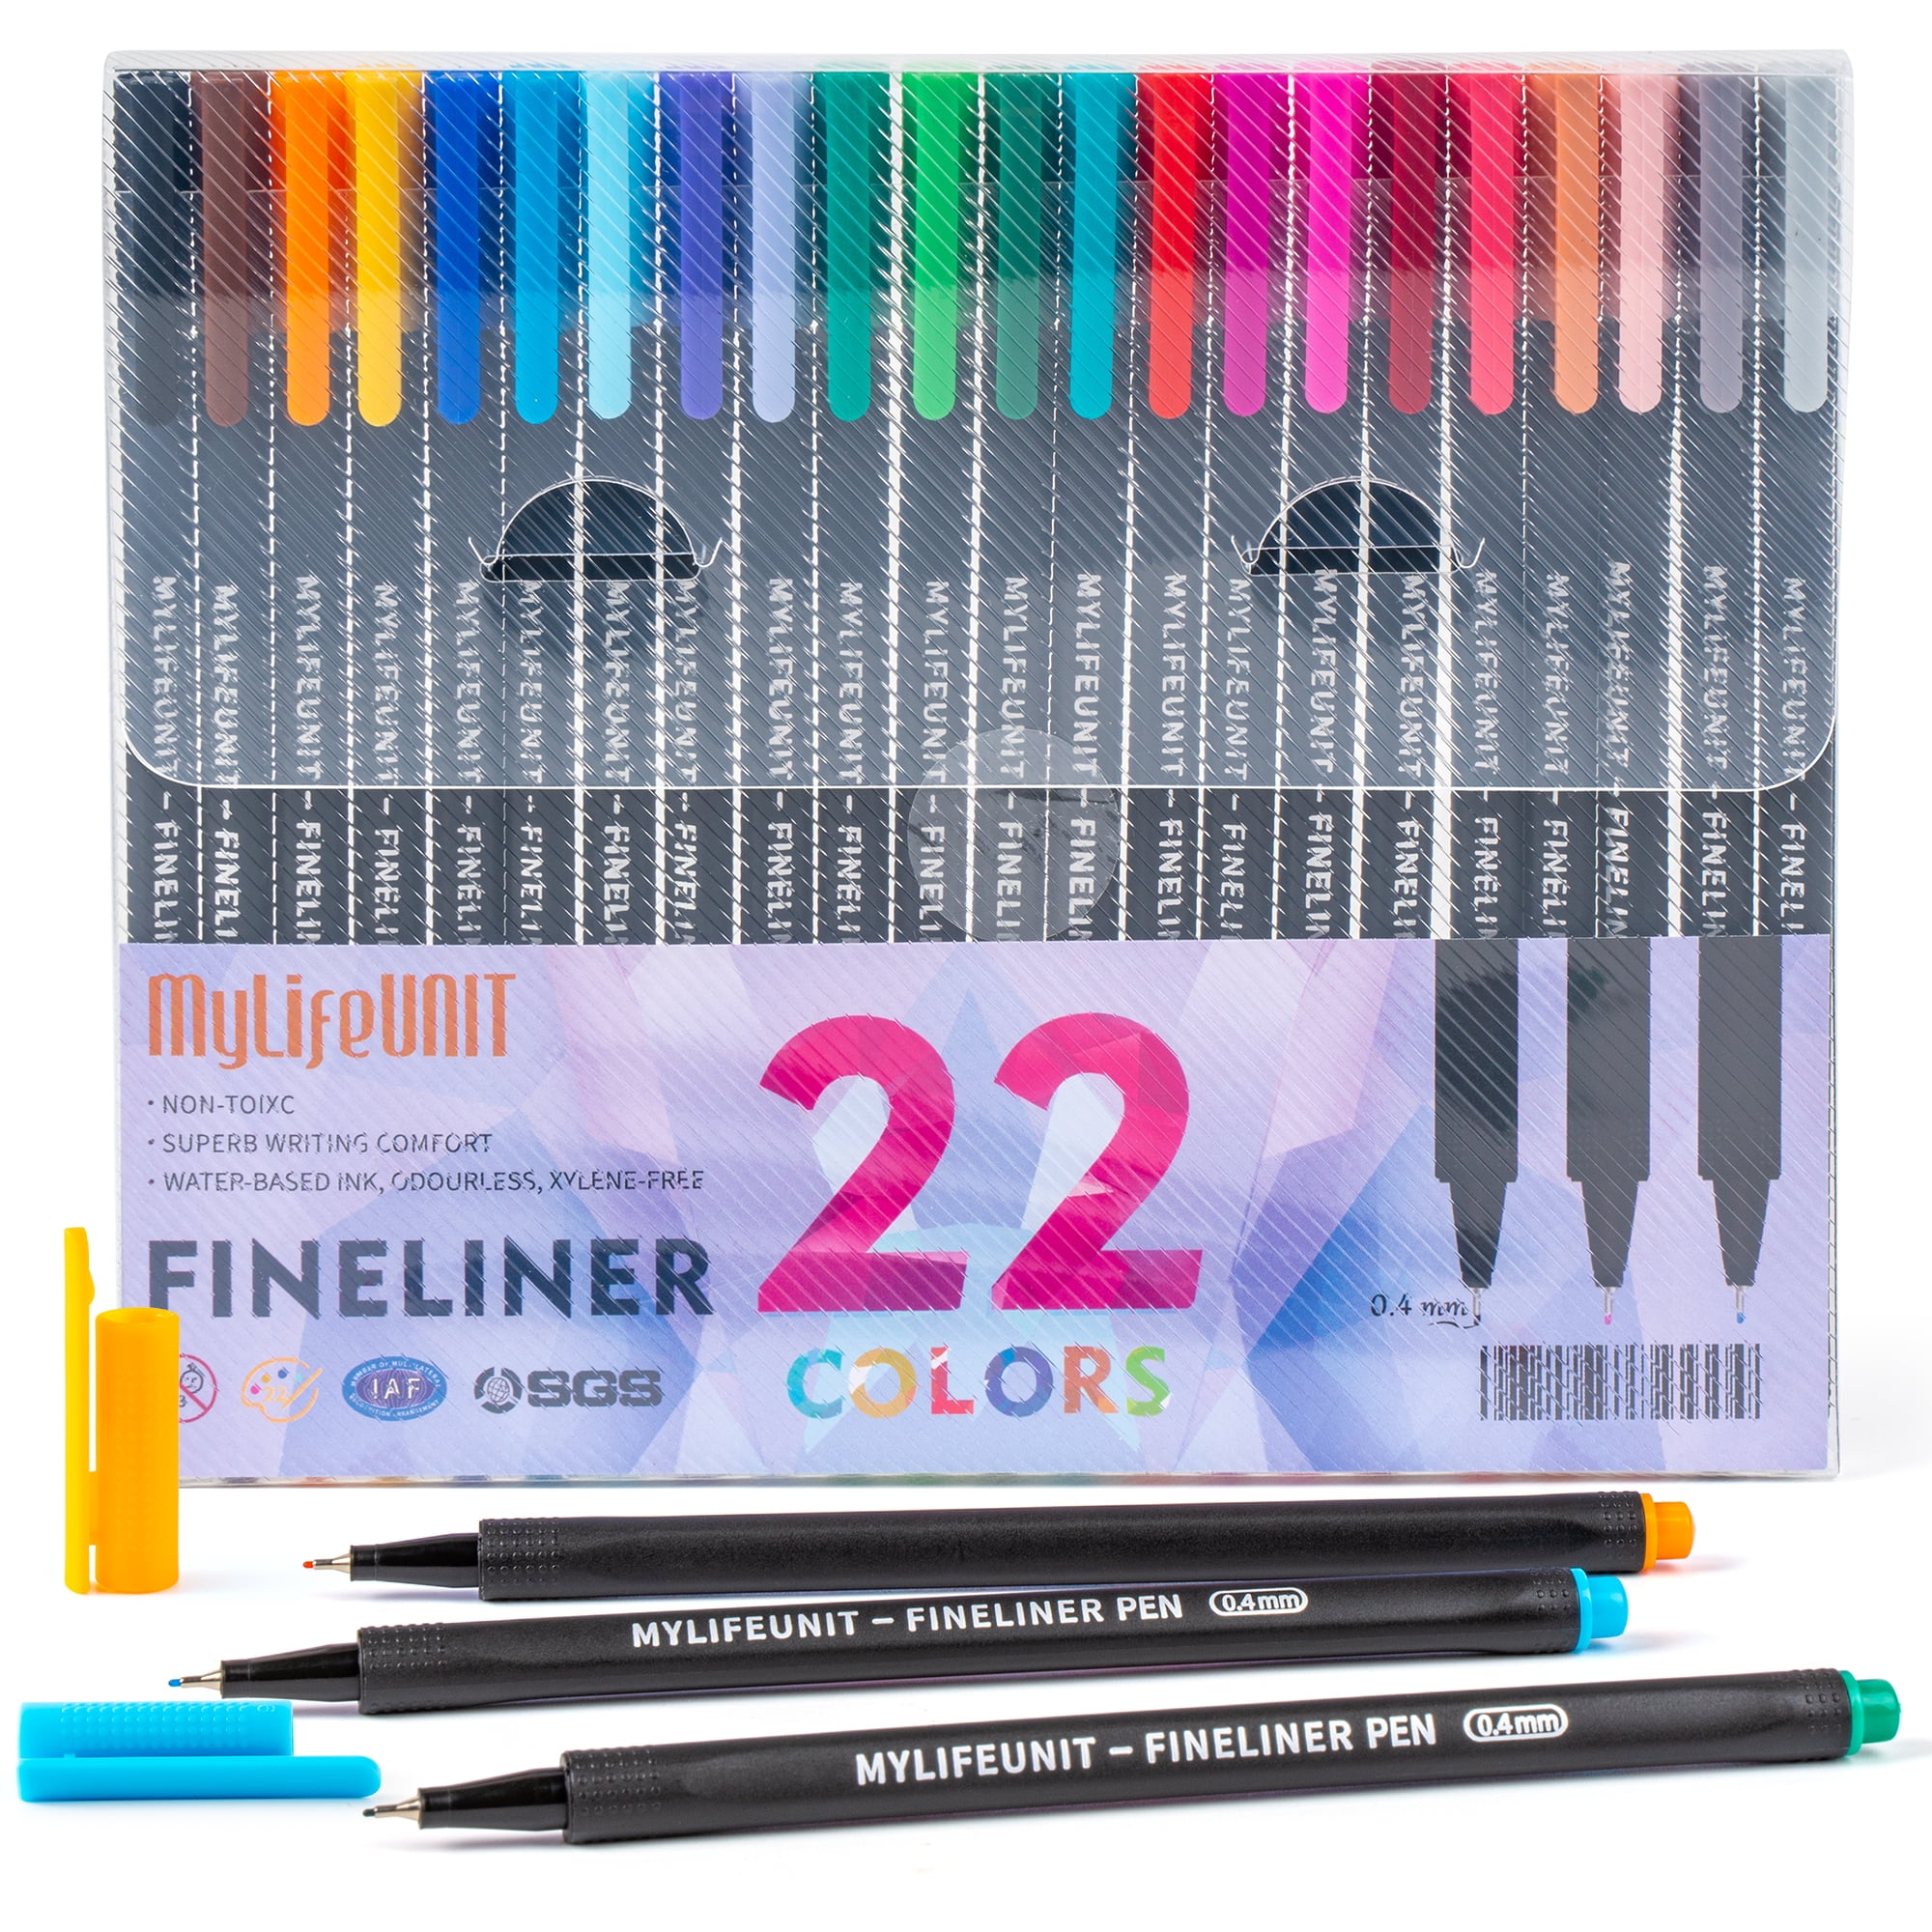 Shuttle Art Fineline Colored Pens, 100 Colors 0.4mm Fineliner Color Pen Set  Fine Line Drawing Pen Fine Point Markers Perfect for Adult Coloring Books  Drawing and School Supplies 